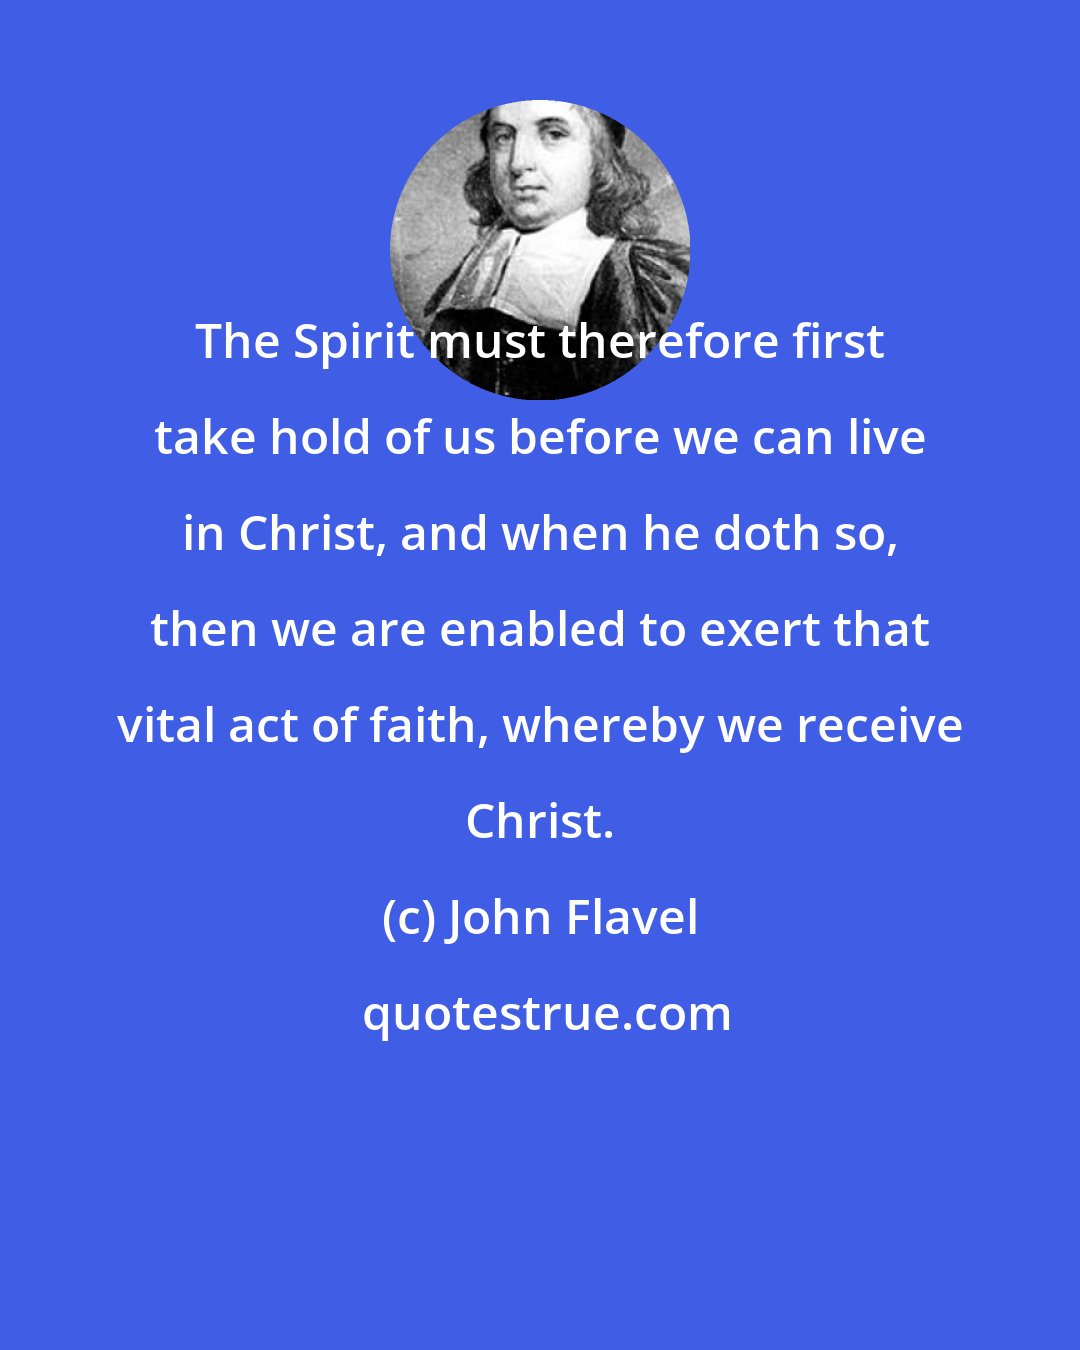 John Flavel: The Spirit must therefore first take hold of us before we can live in Christ, and when he doth so, then we are enabled to exert that vital act of faith, whereby we receive Christ.